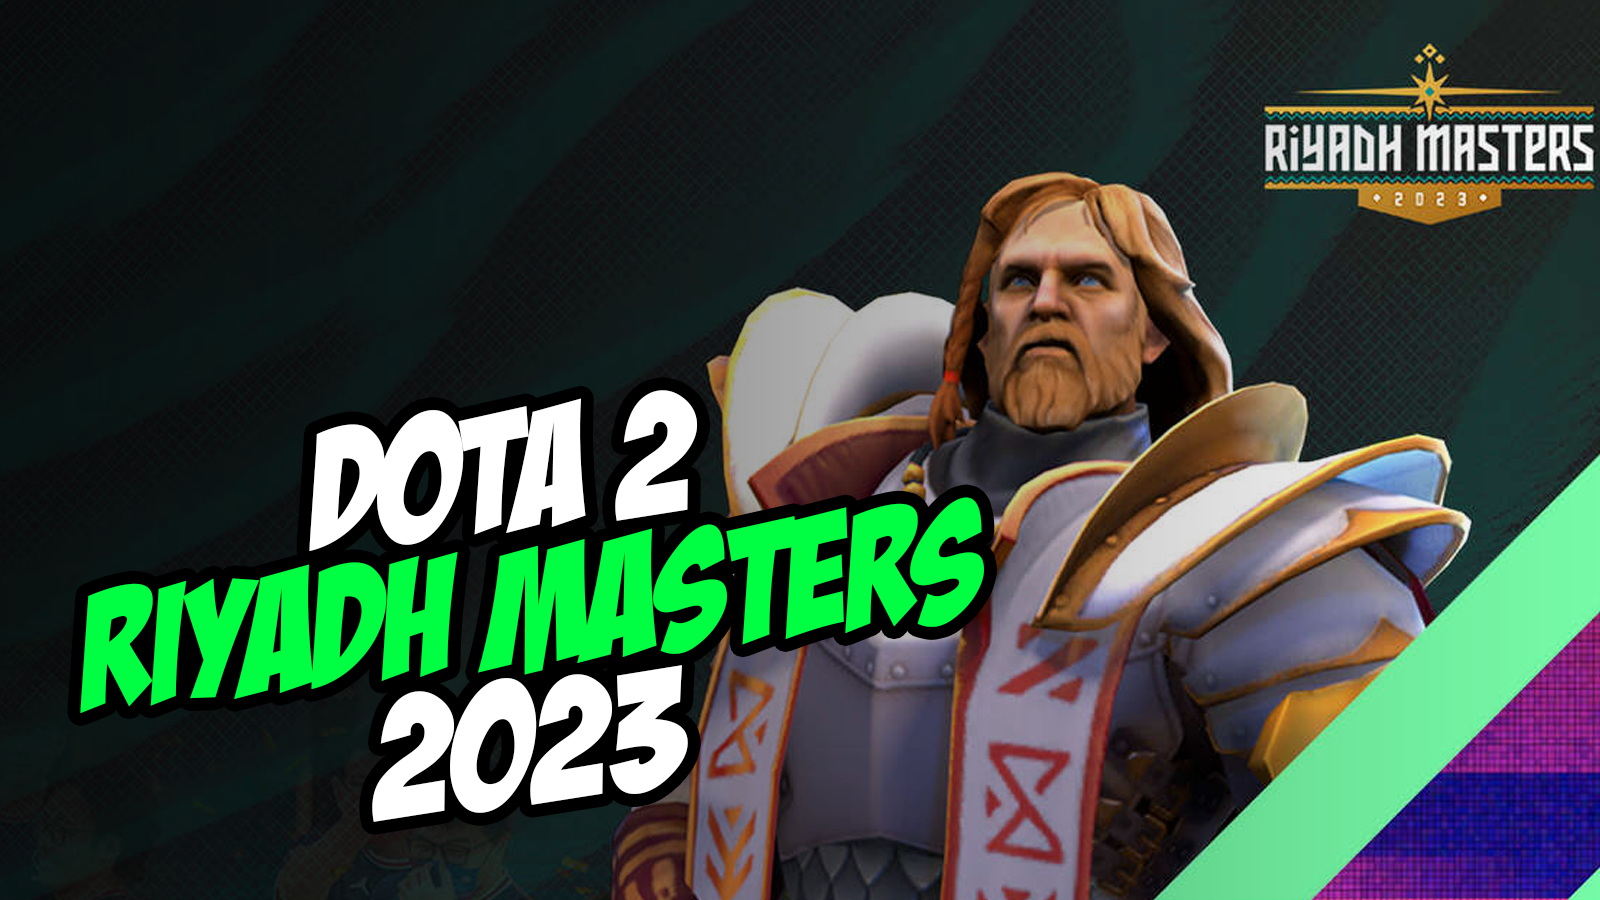 DOTA 2. Riyadh Masters 2023 – Event Info, Schedule & Qualified Teams. 17th July – 30th July 